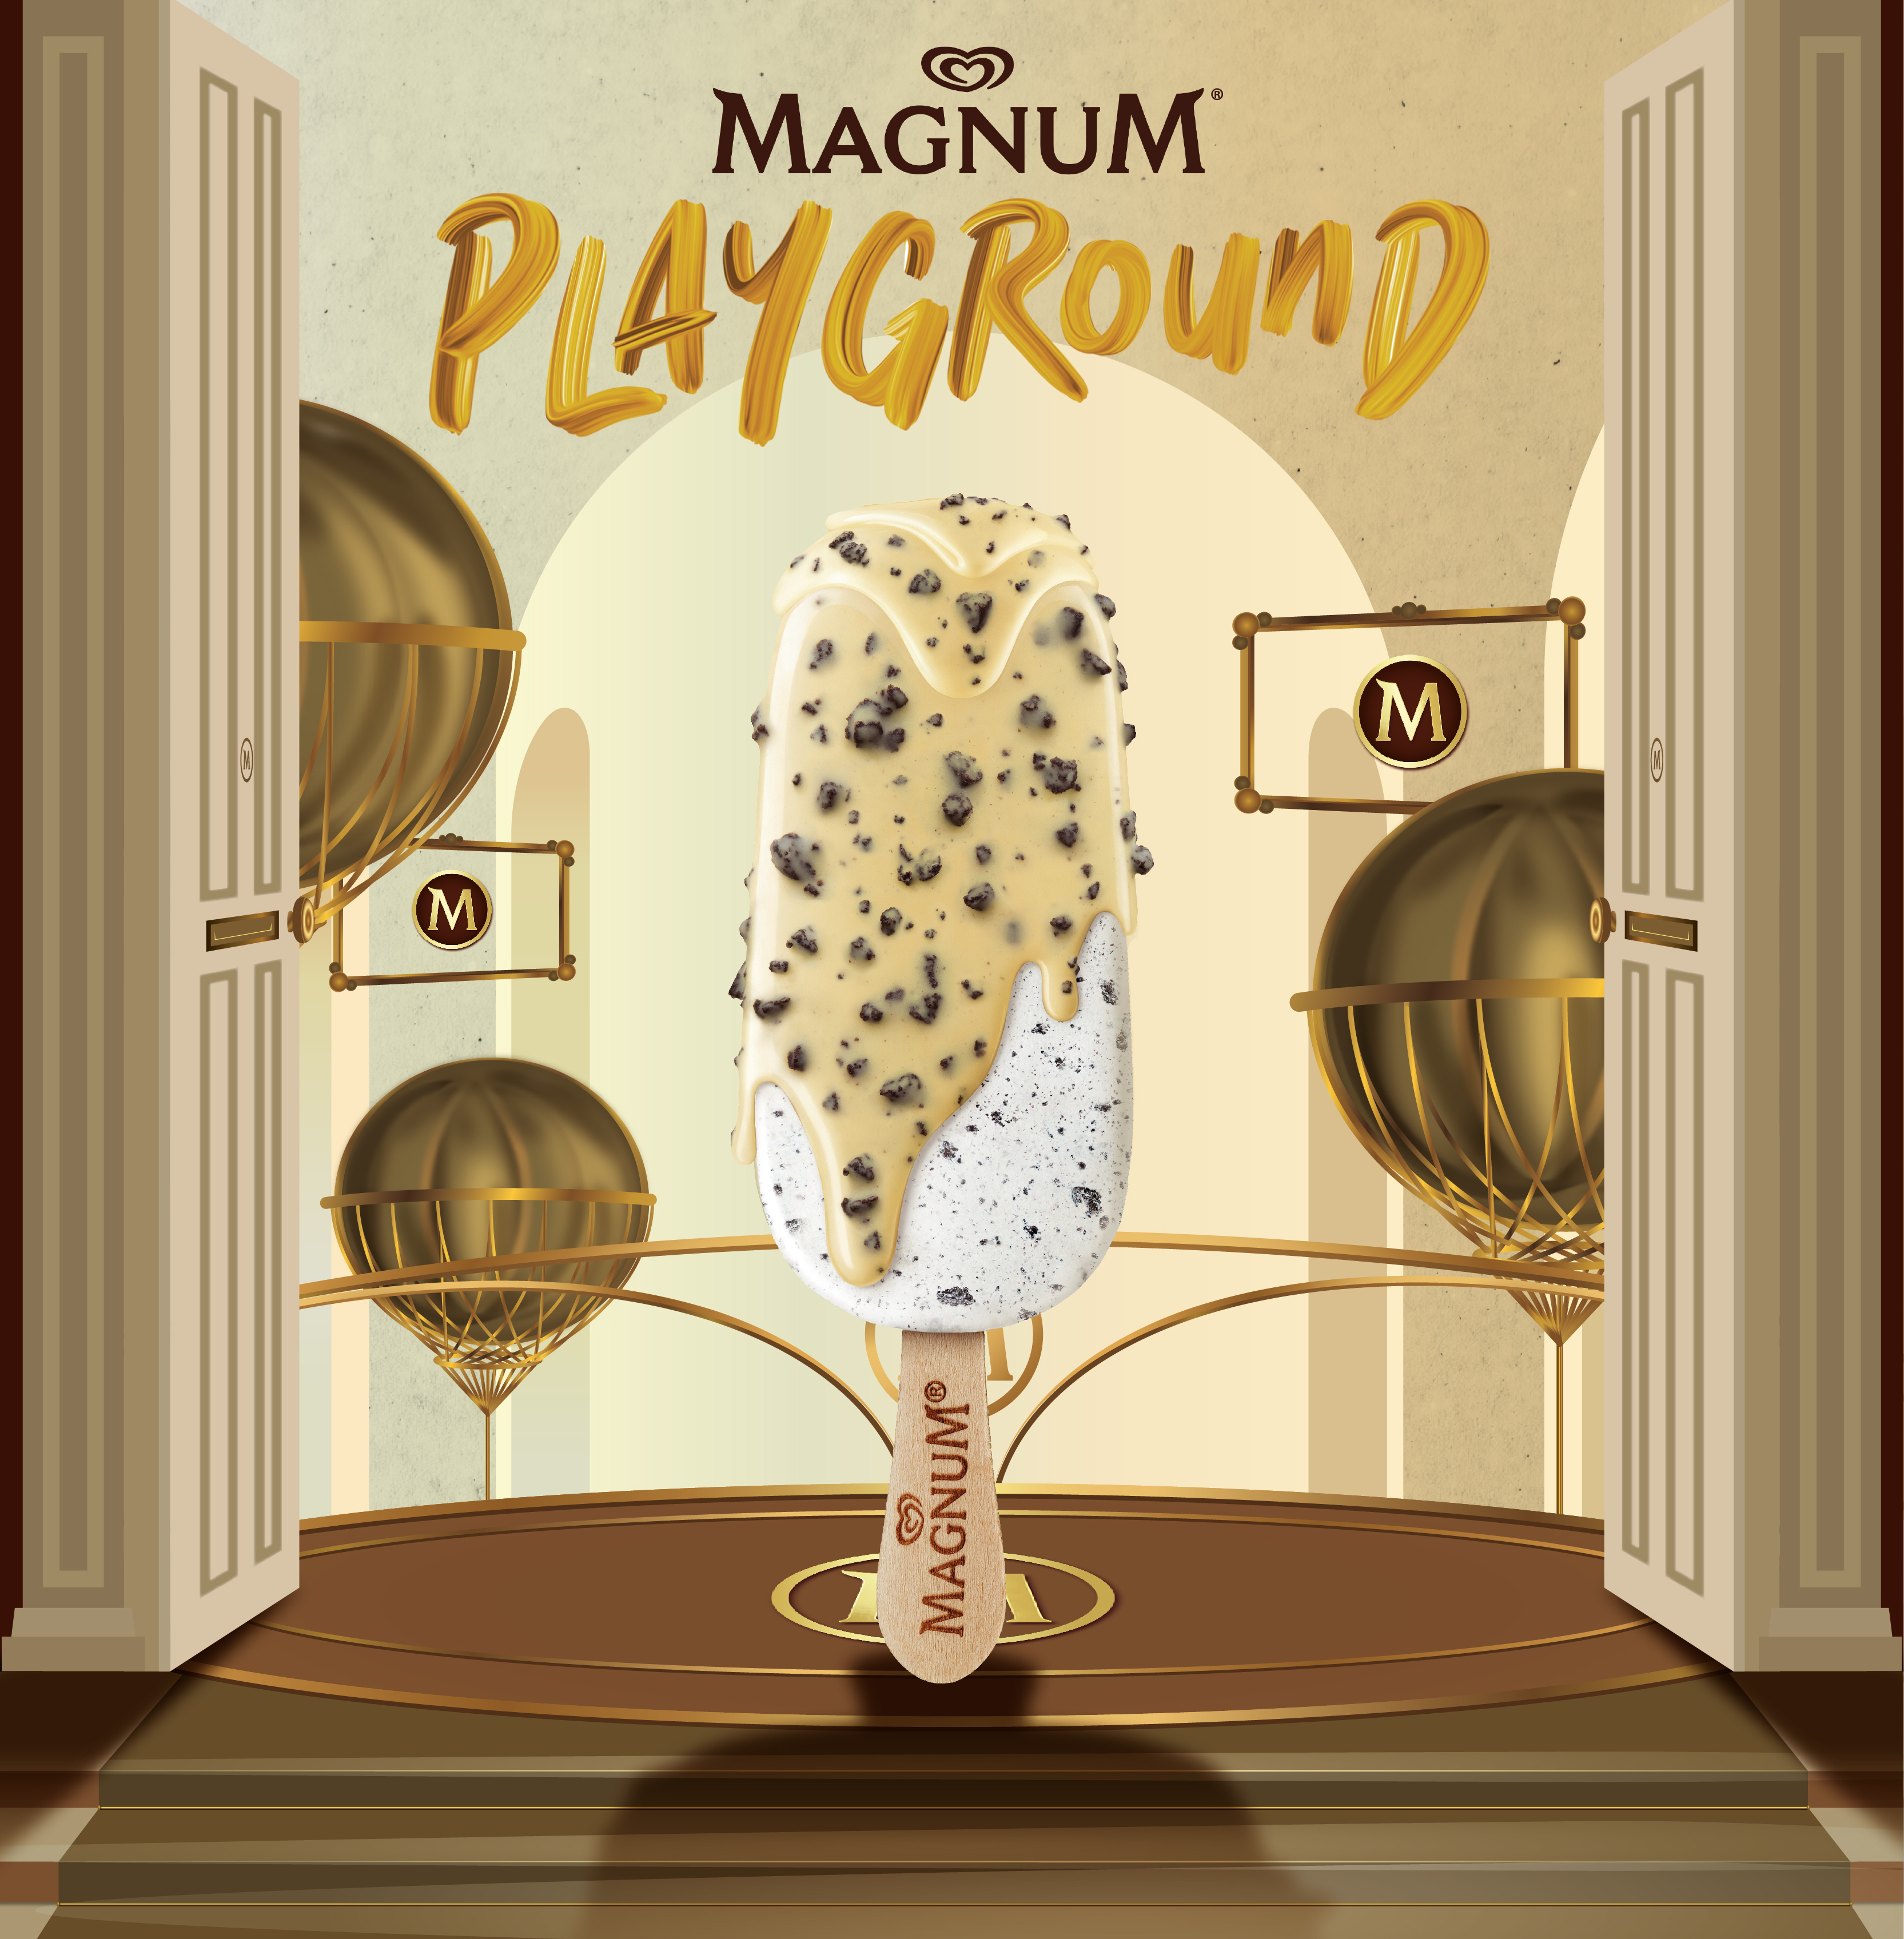 01. Celebrate the New Magnum Cookies and Cream with Magnum’s First-Ever AR Experience